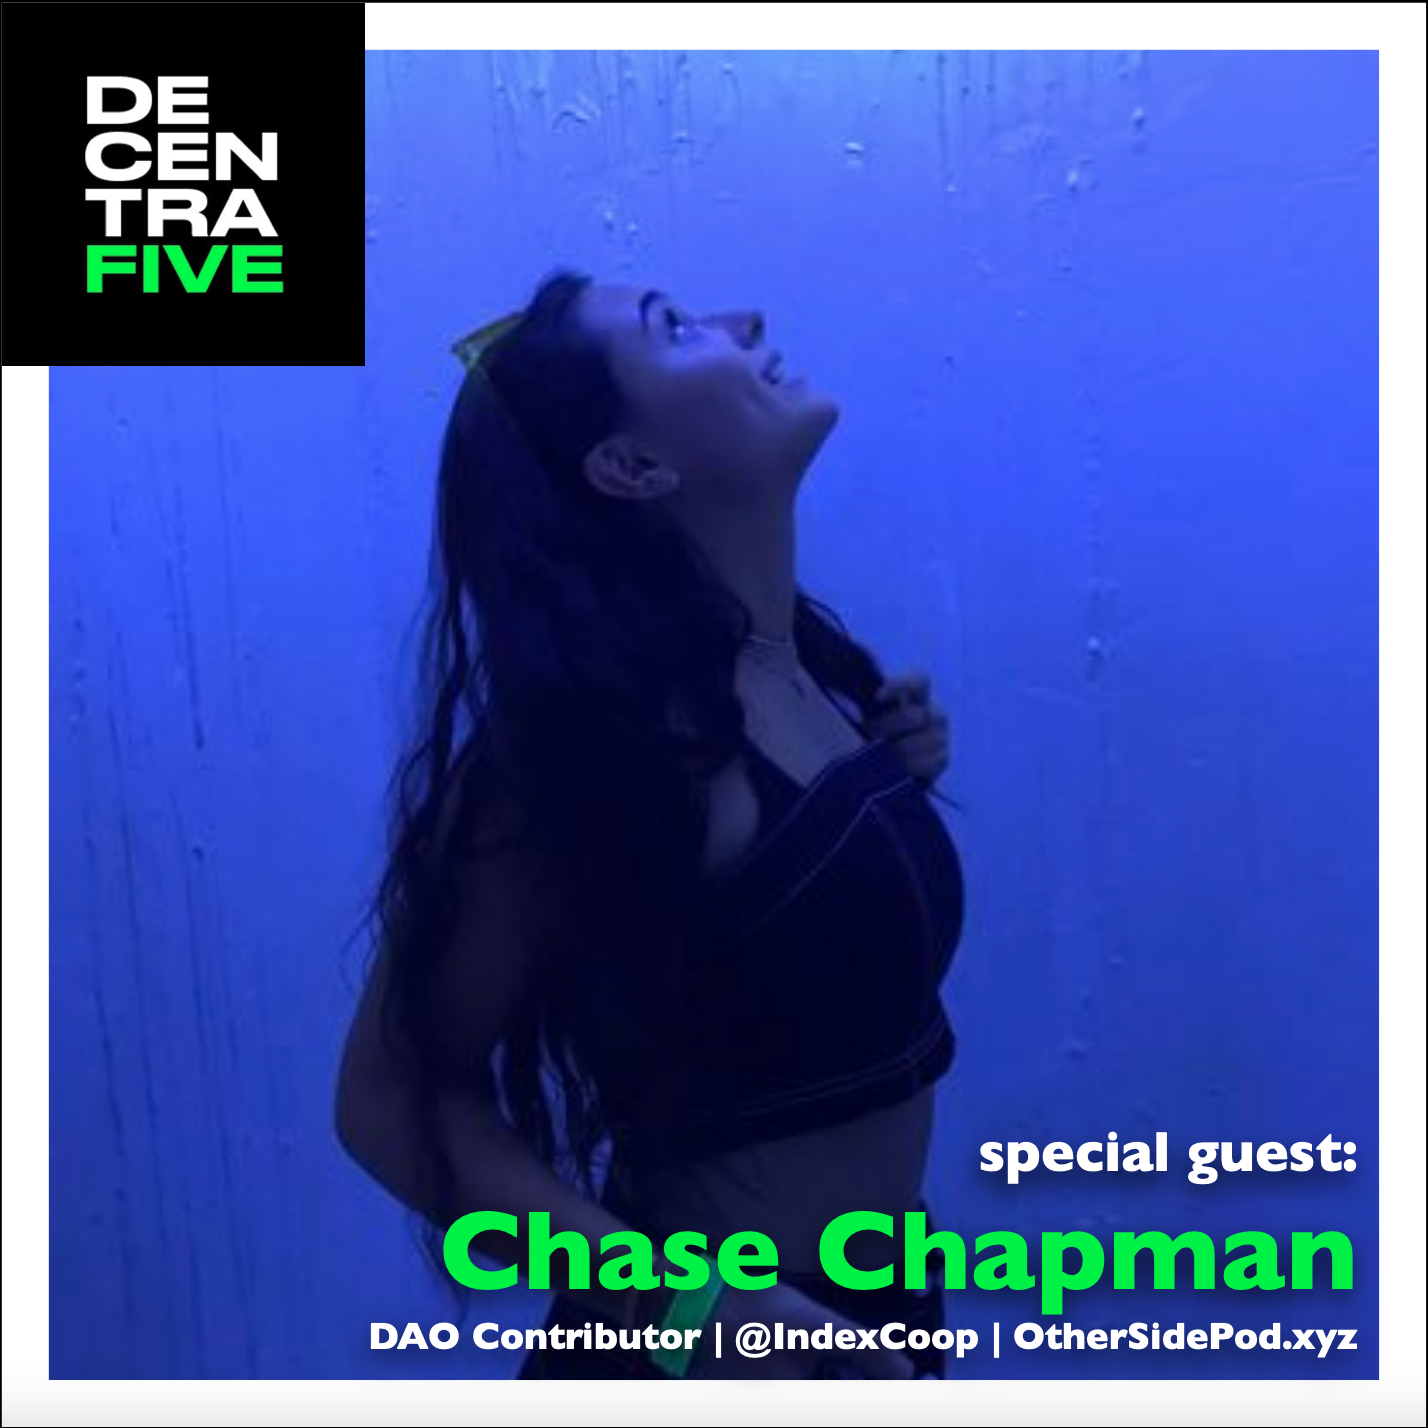 Chase Chapman, @ChaseRChapman, DAO Contributor with @IndexCoop & @OrcaProtocol, On The Other Side Podcast Host, investor in @CowfundDAO, co-founder now advisor of @Decentology | on DECENTRAFIVE Image